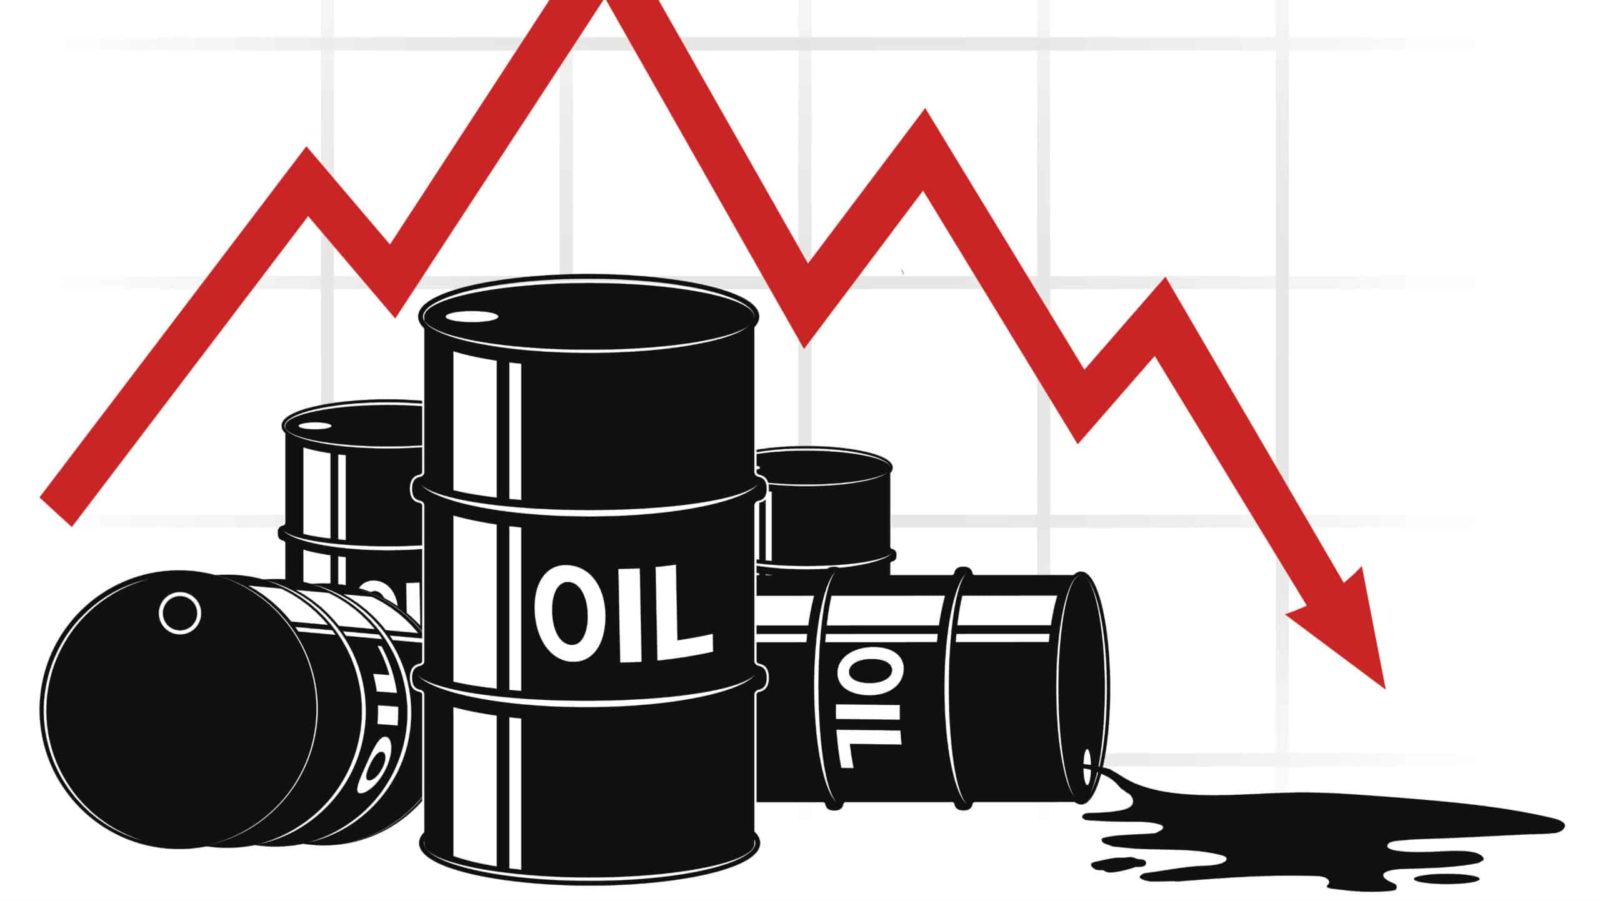 U.S. Oil Price Crashes More Than 300% into Negative For The First Time in History